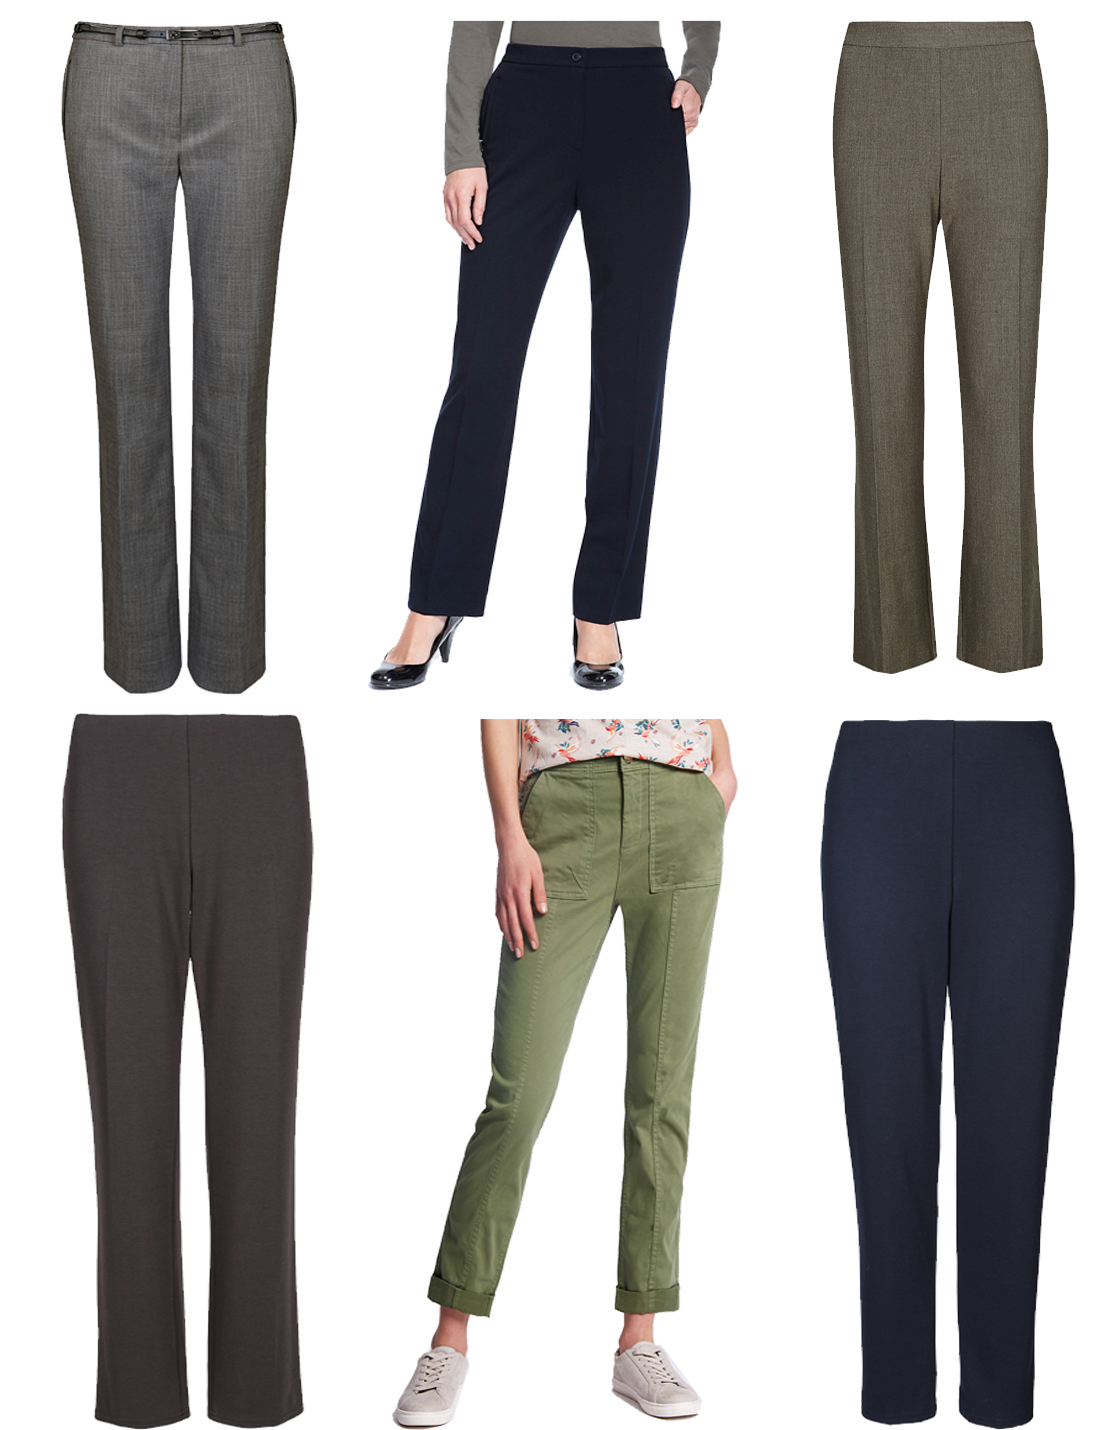 Marks and Spencer - - M&5 ASSORTED Ladies Trousers - Size 10 to 22